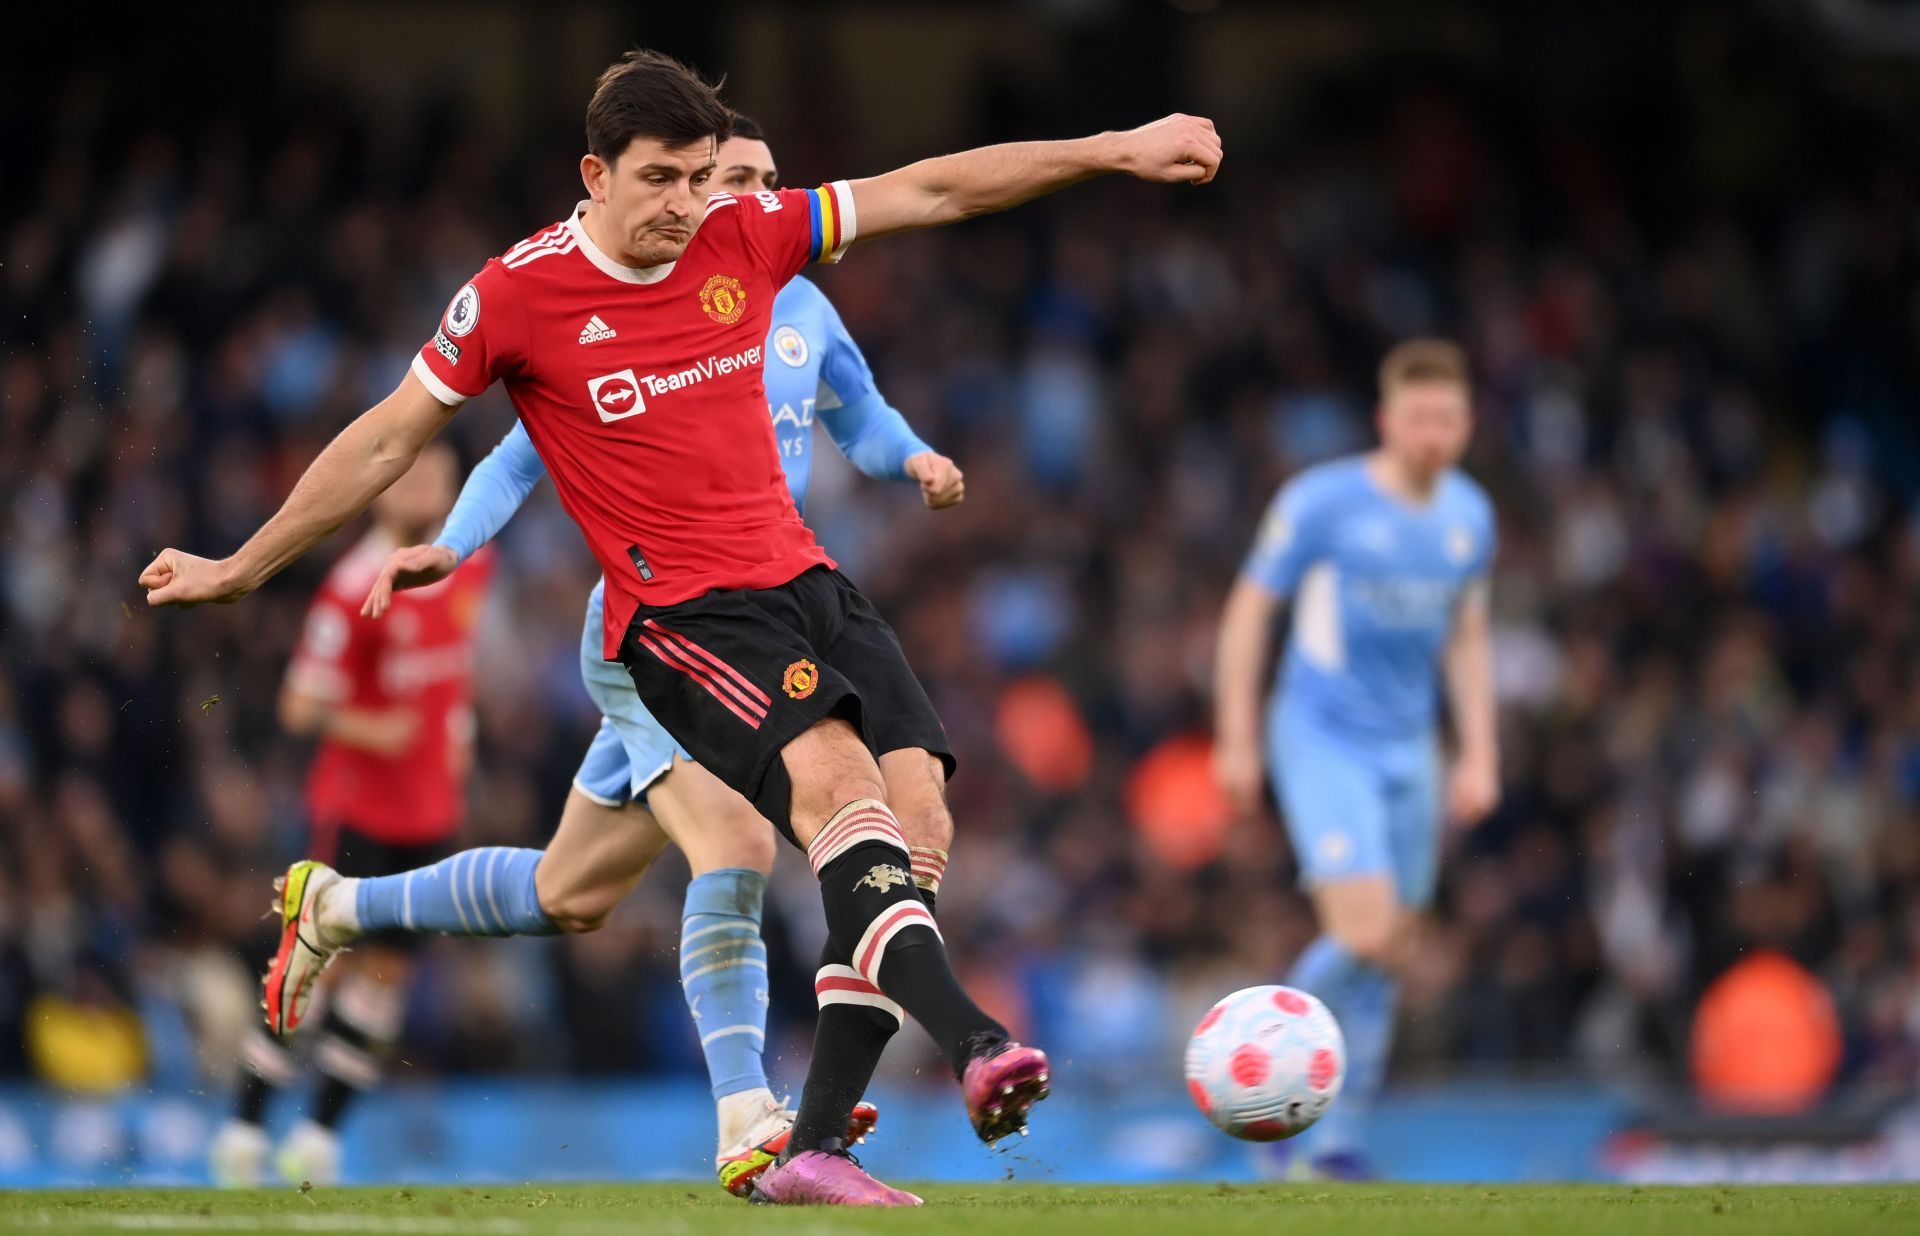 Harry Maguire is likely to start again despite a disappointing performance against City